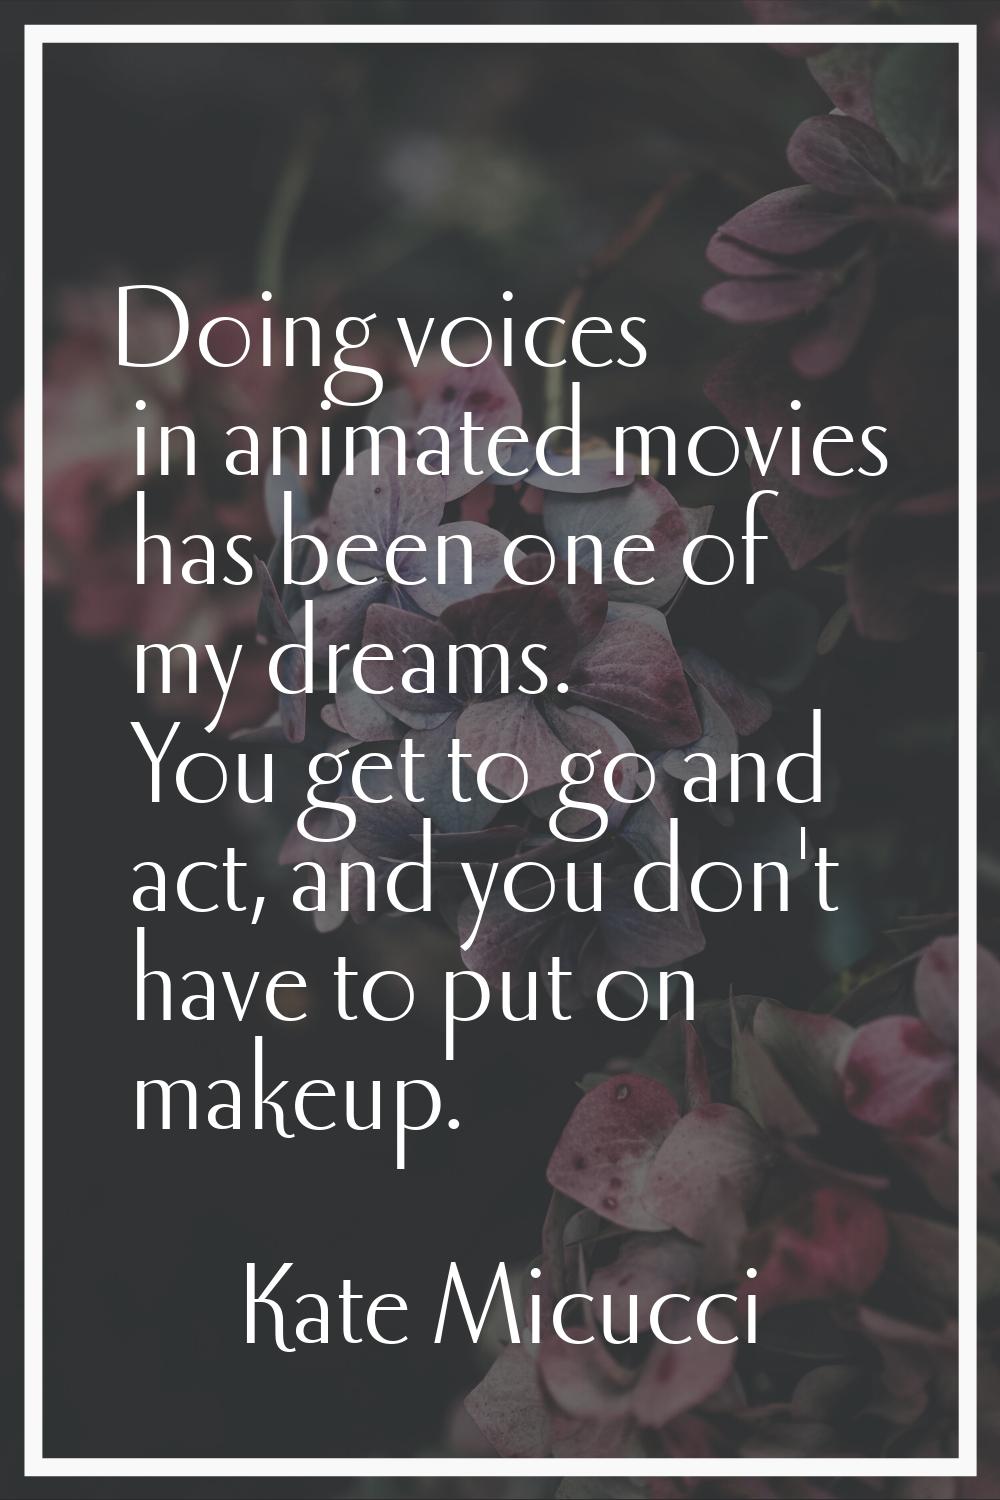 Doing voices in animated movies has been one of my dreams. You get to go and act, and you don't hav